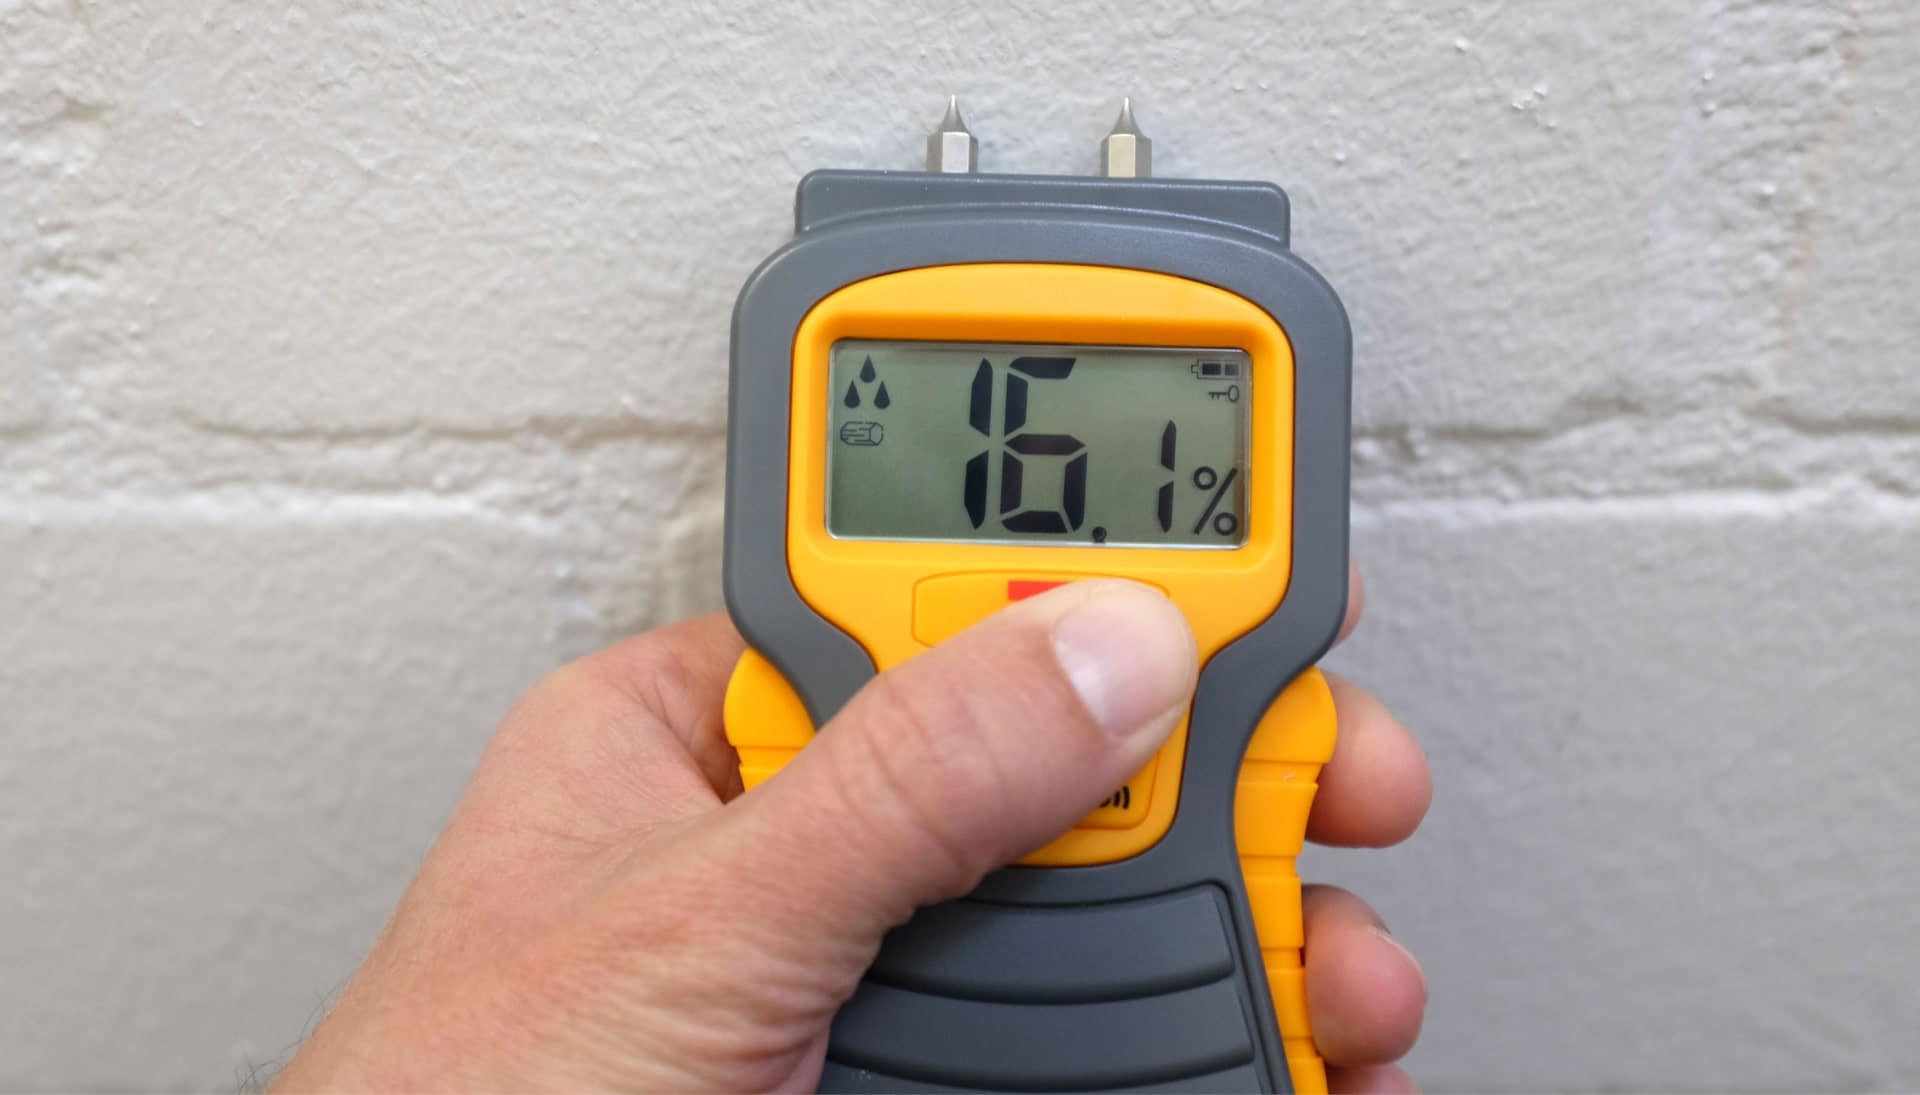 We provide fast, accurate, and affordable mold testing services in Provo, Utah.